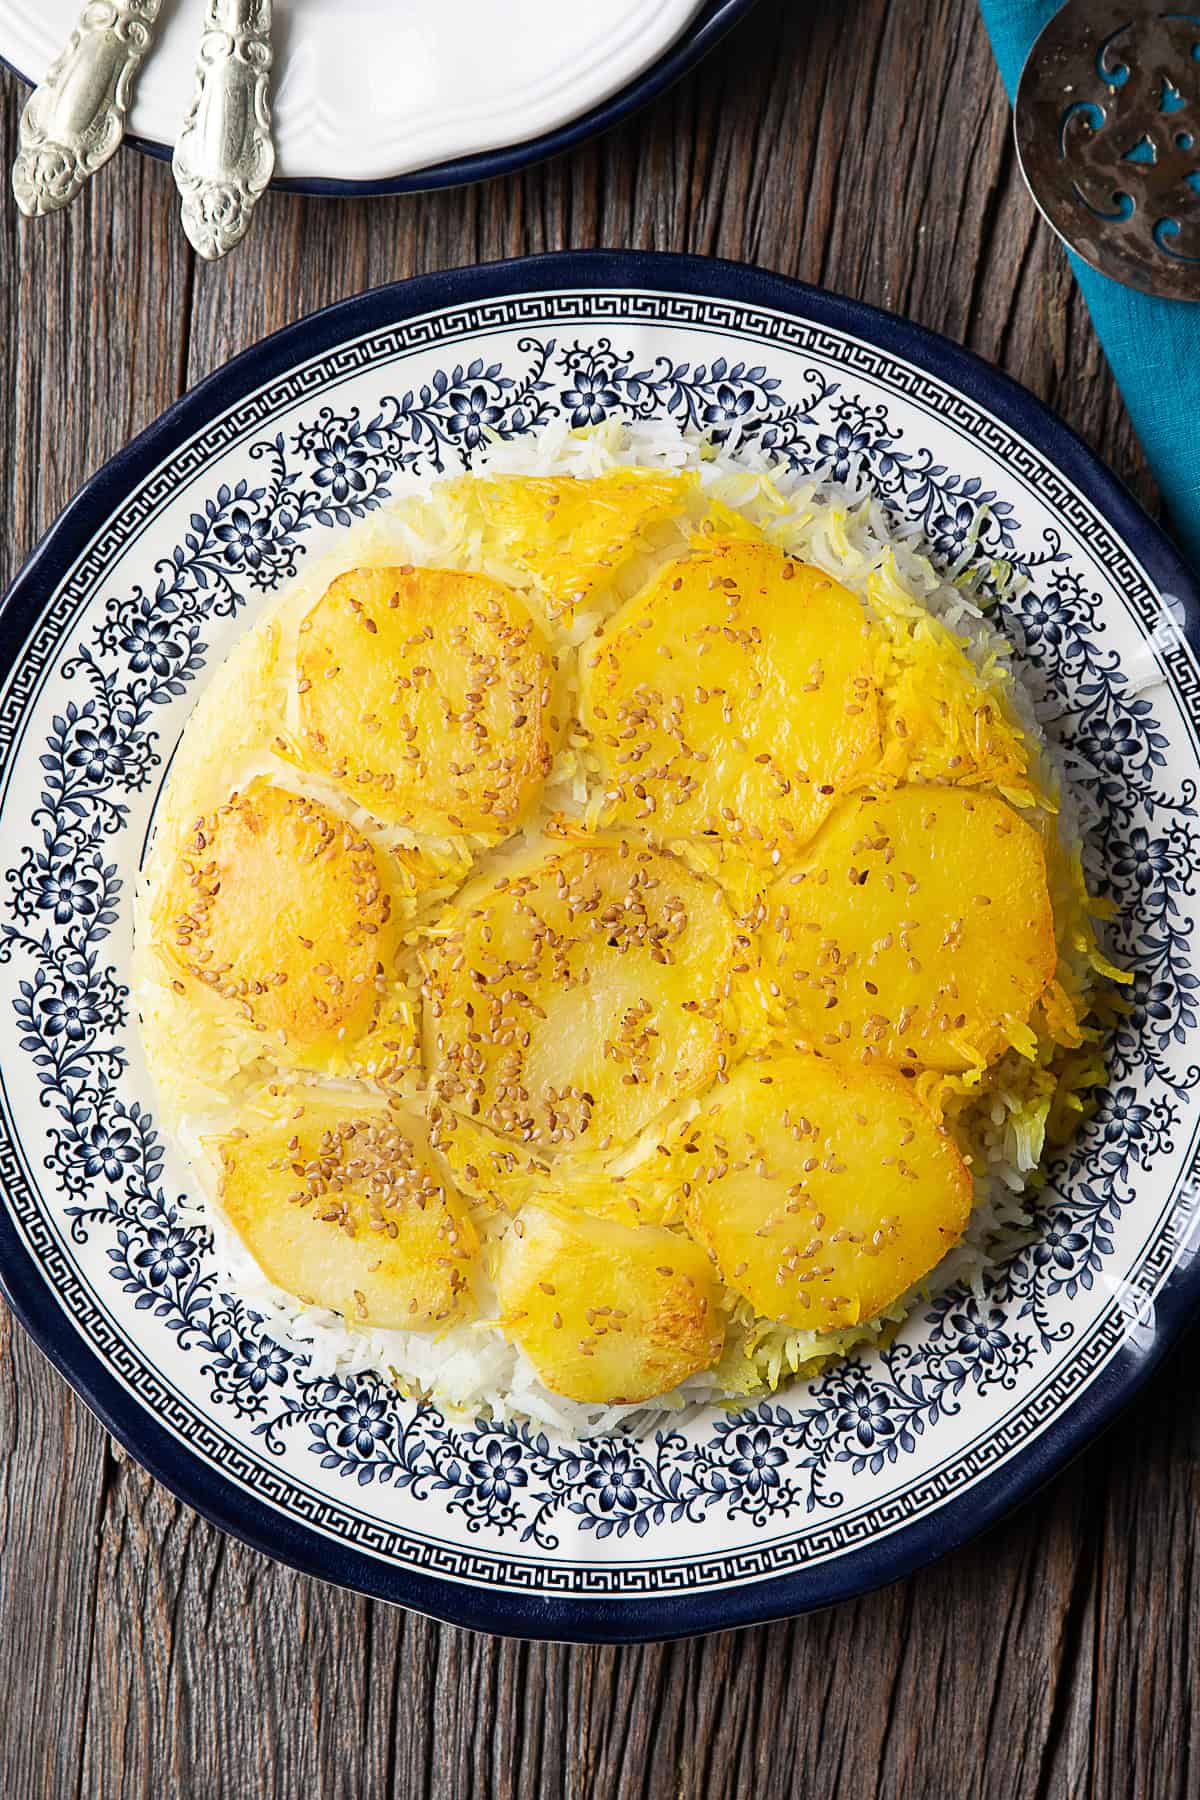 Persian potato tahdig: A golden crispy layer of thinly sliced potatoes atop fluffy saffron-infused rice, served in a traditional Persian pot.